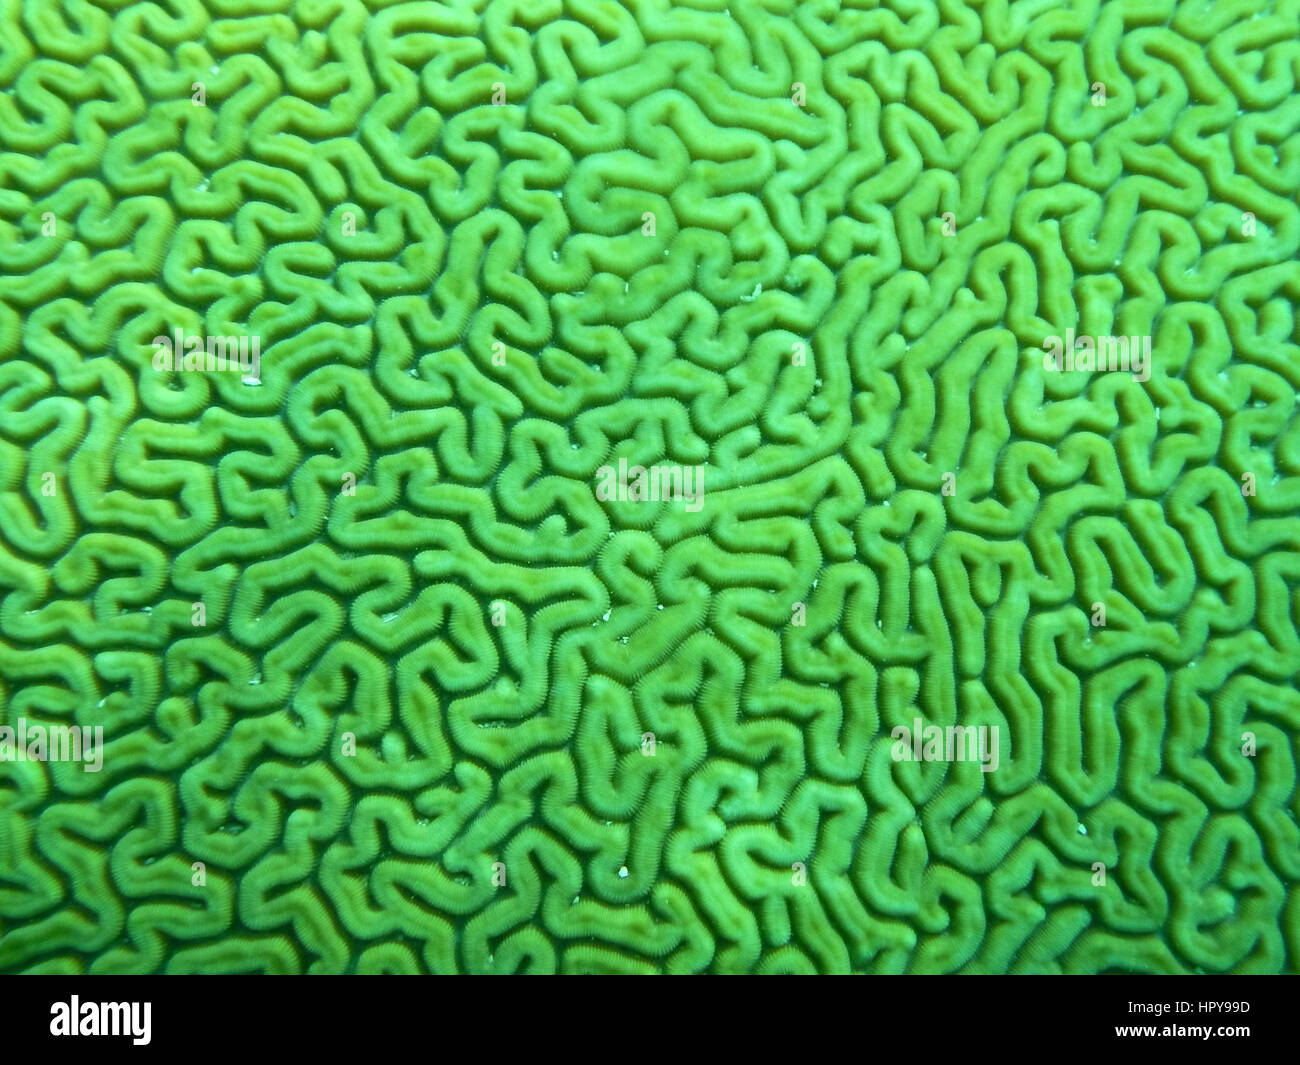 Abstract texture made of close-up brain coral Stock Photo